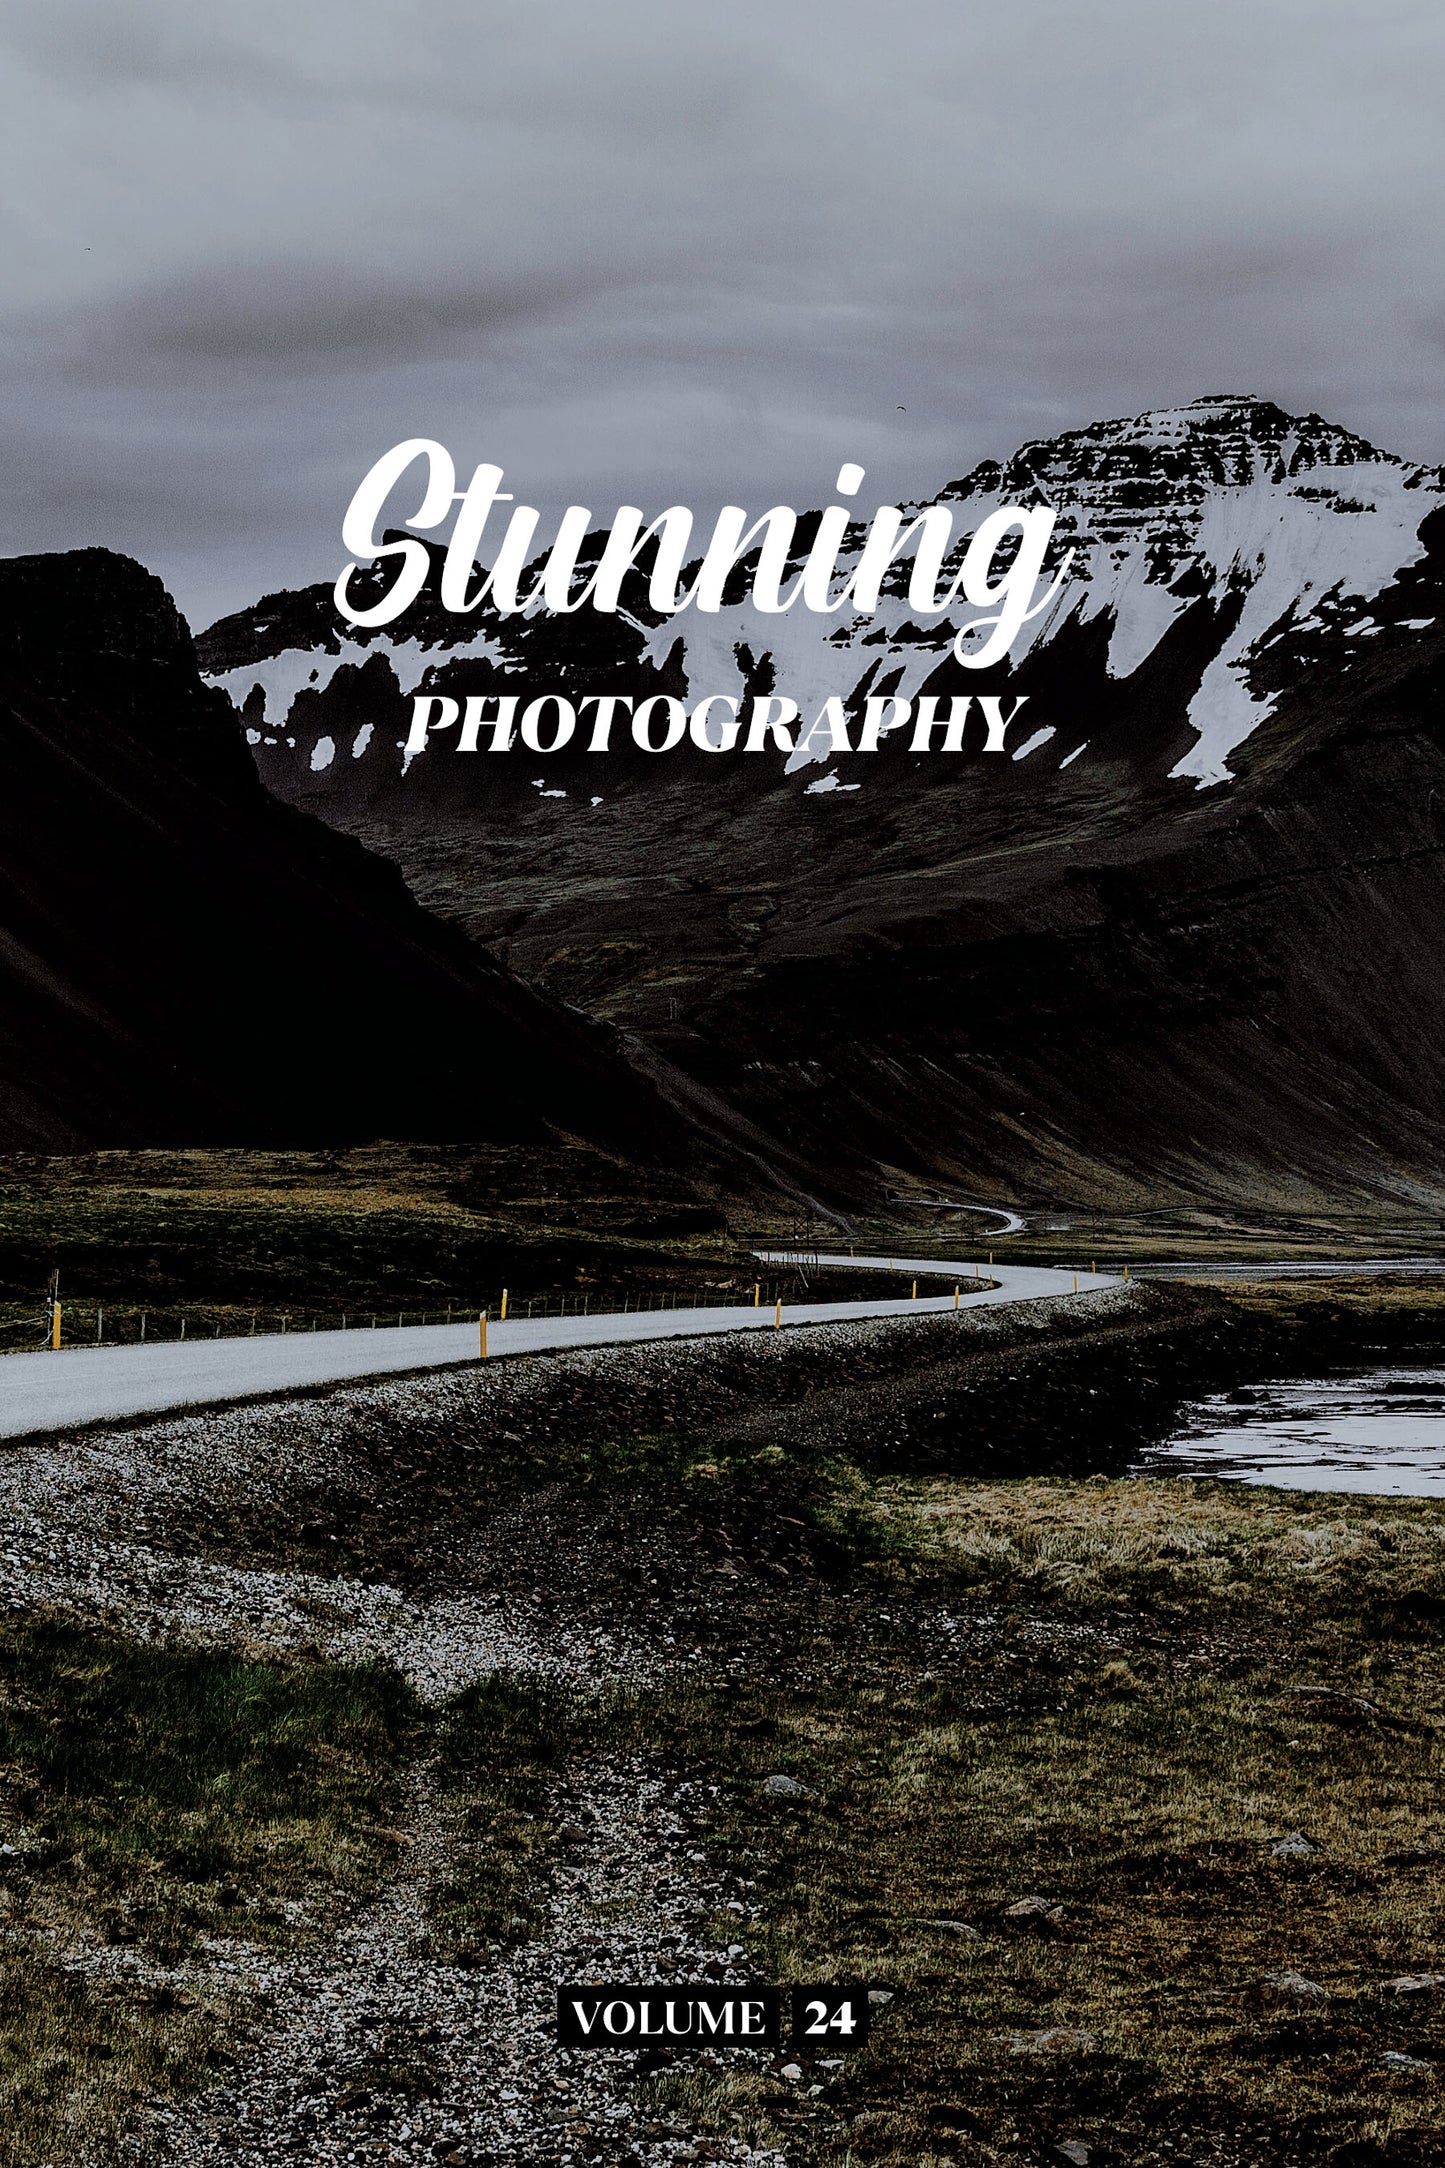 Stunning Photography Volume 24 (Physical Book Pre-Order)